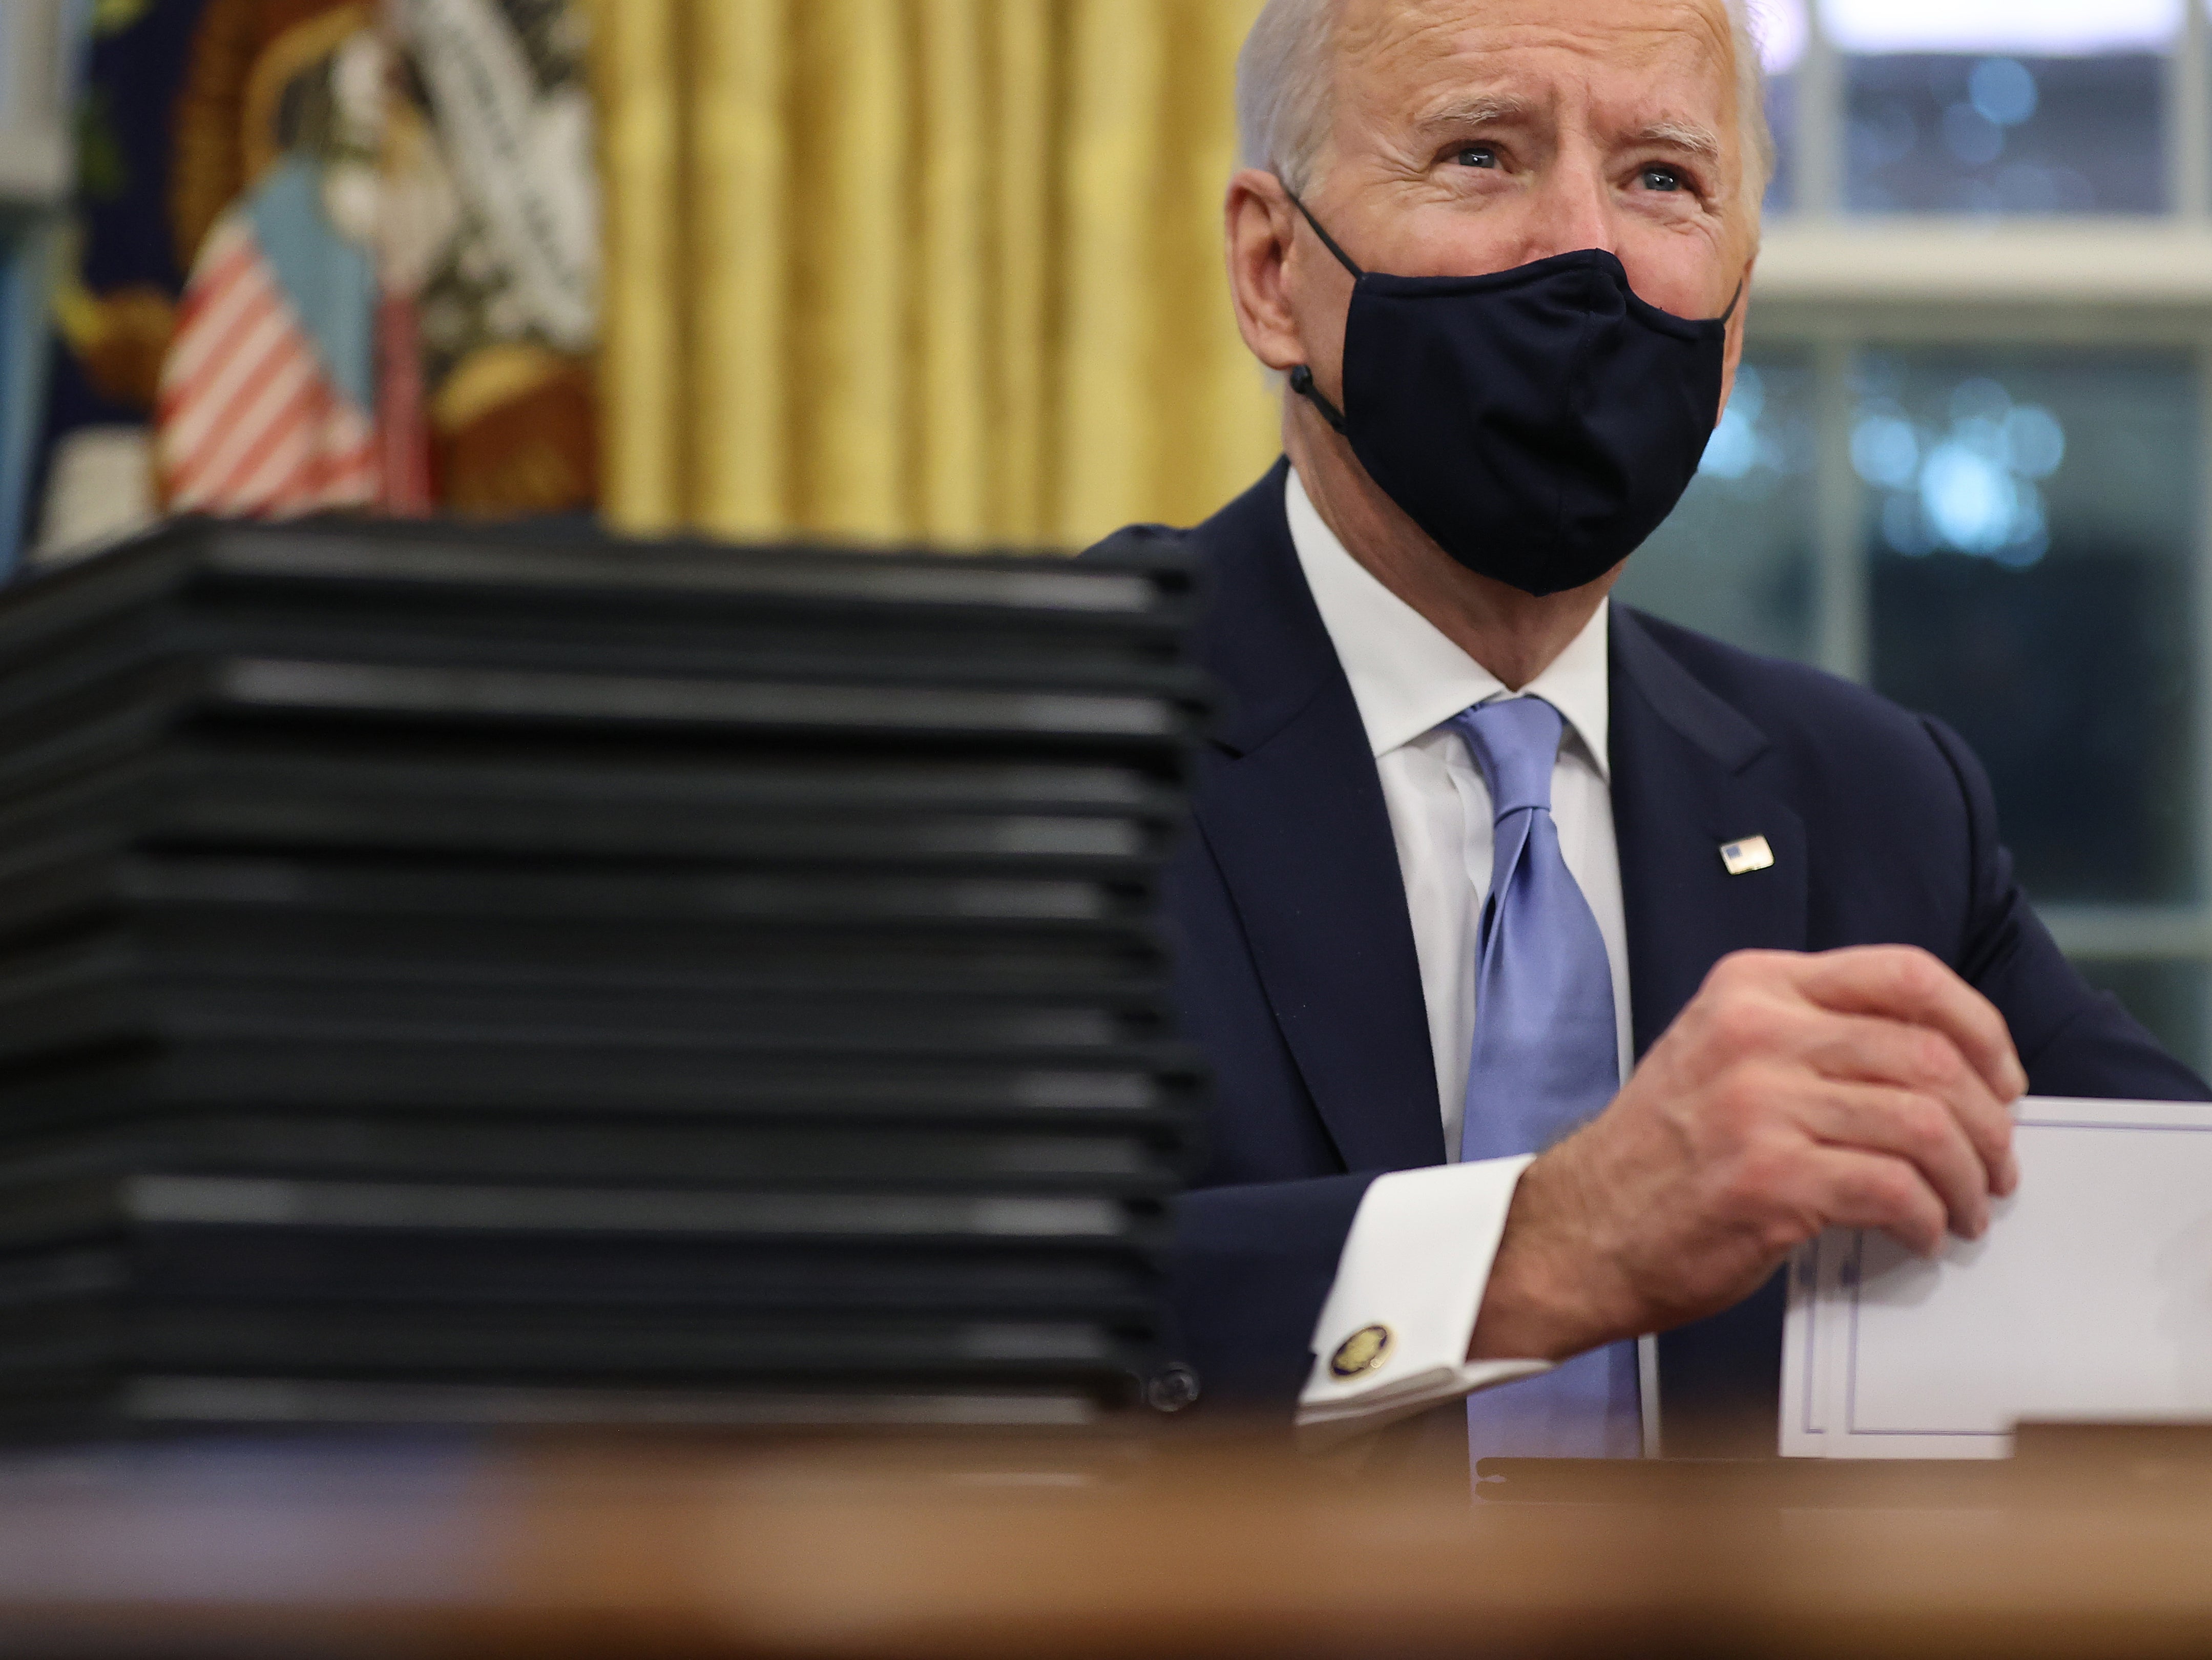 US President Joe Biden prepares to sign a series of executive orders at the Resolute Desk in the Oval Office just hours after his inauguration on 20 January, 2021